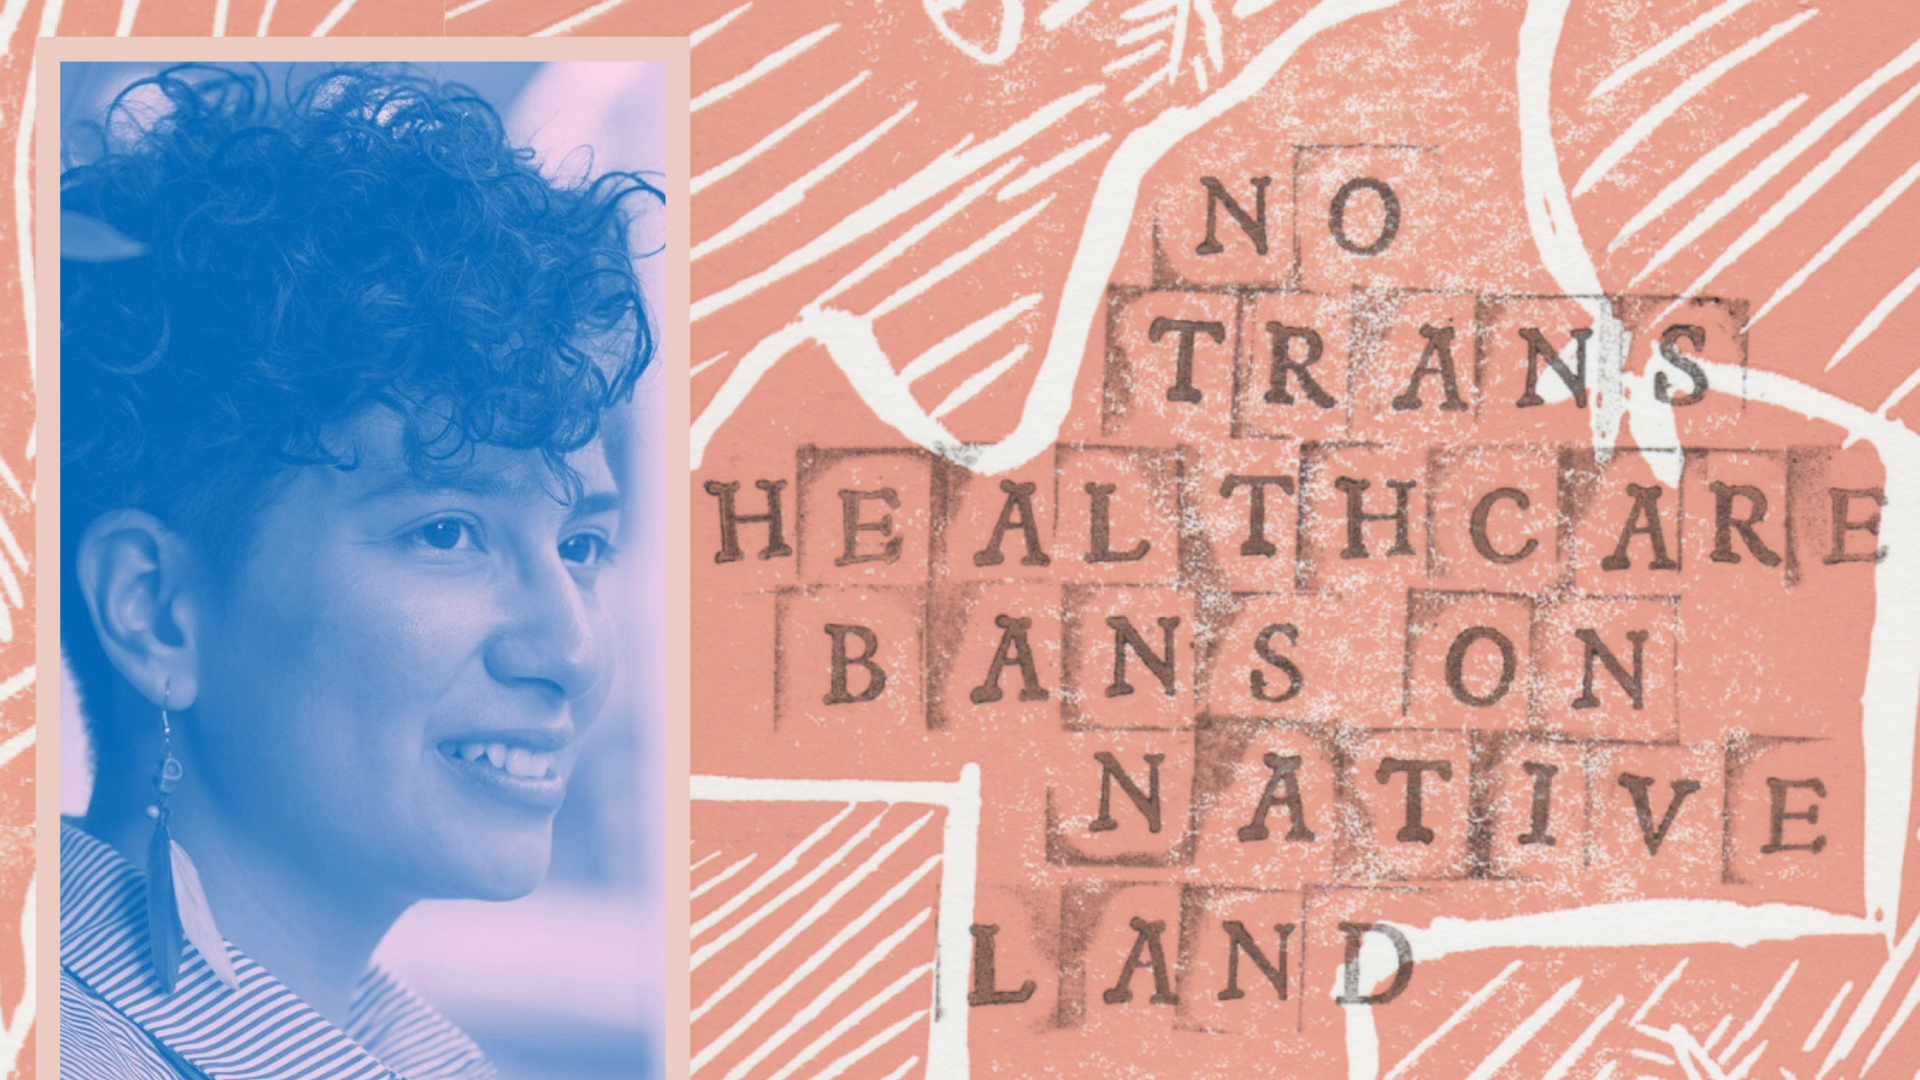 Headshot of the speaker to the left with short curly hair and wearing feather earrings. Orange background with text: No trans healthcare bans on native land.